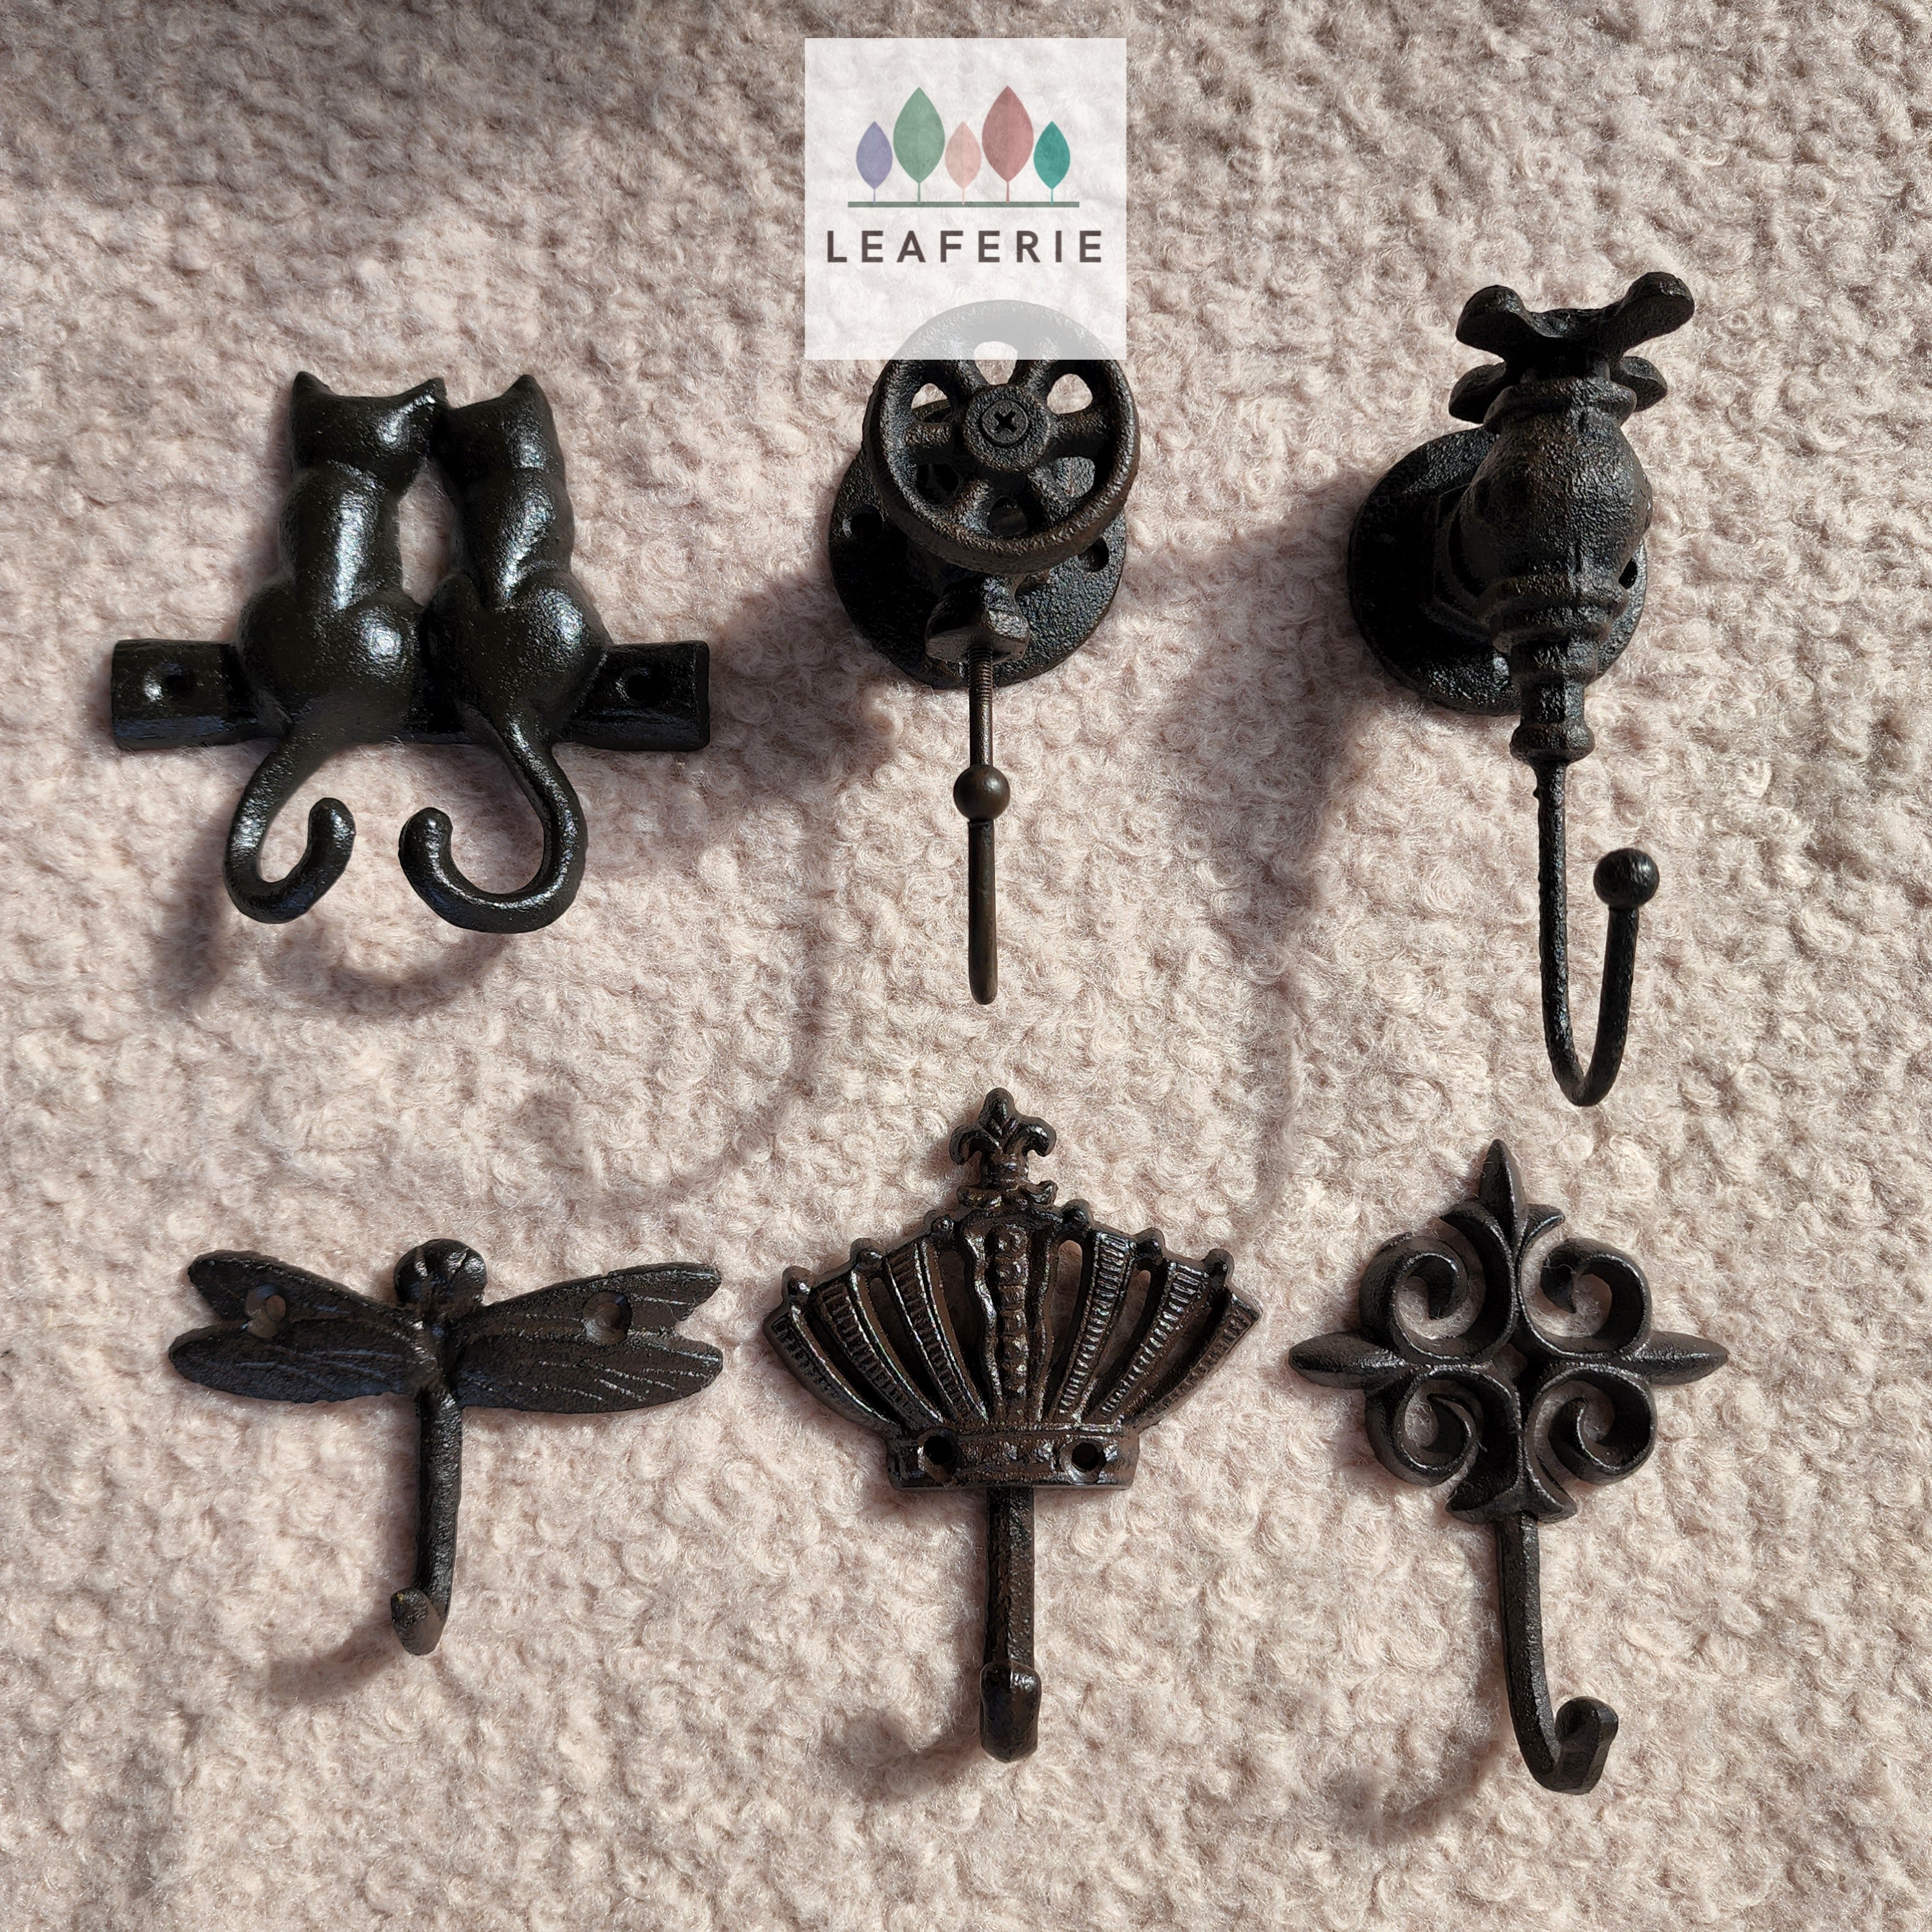 Cast Iron Assorted hooks The Leaferie garden decoration